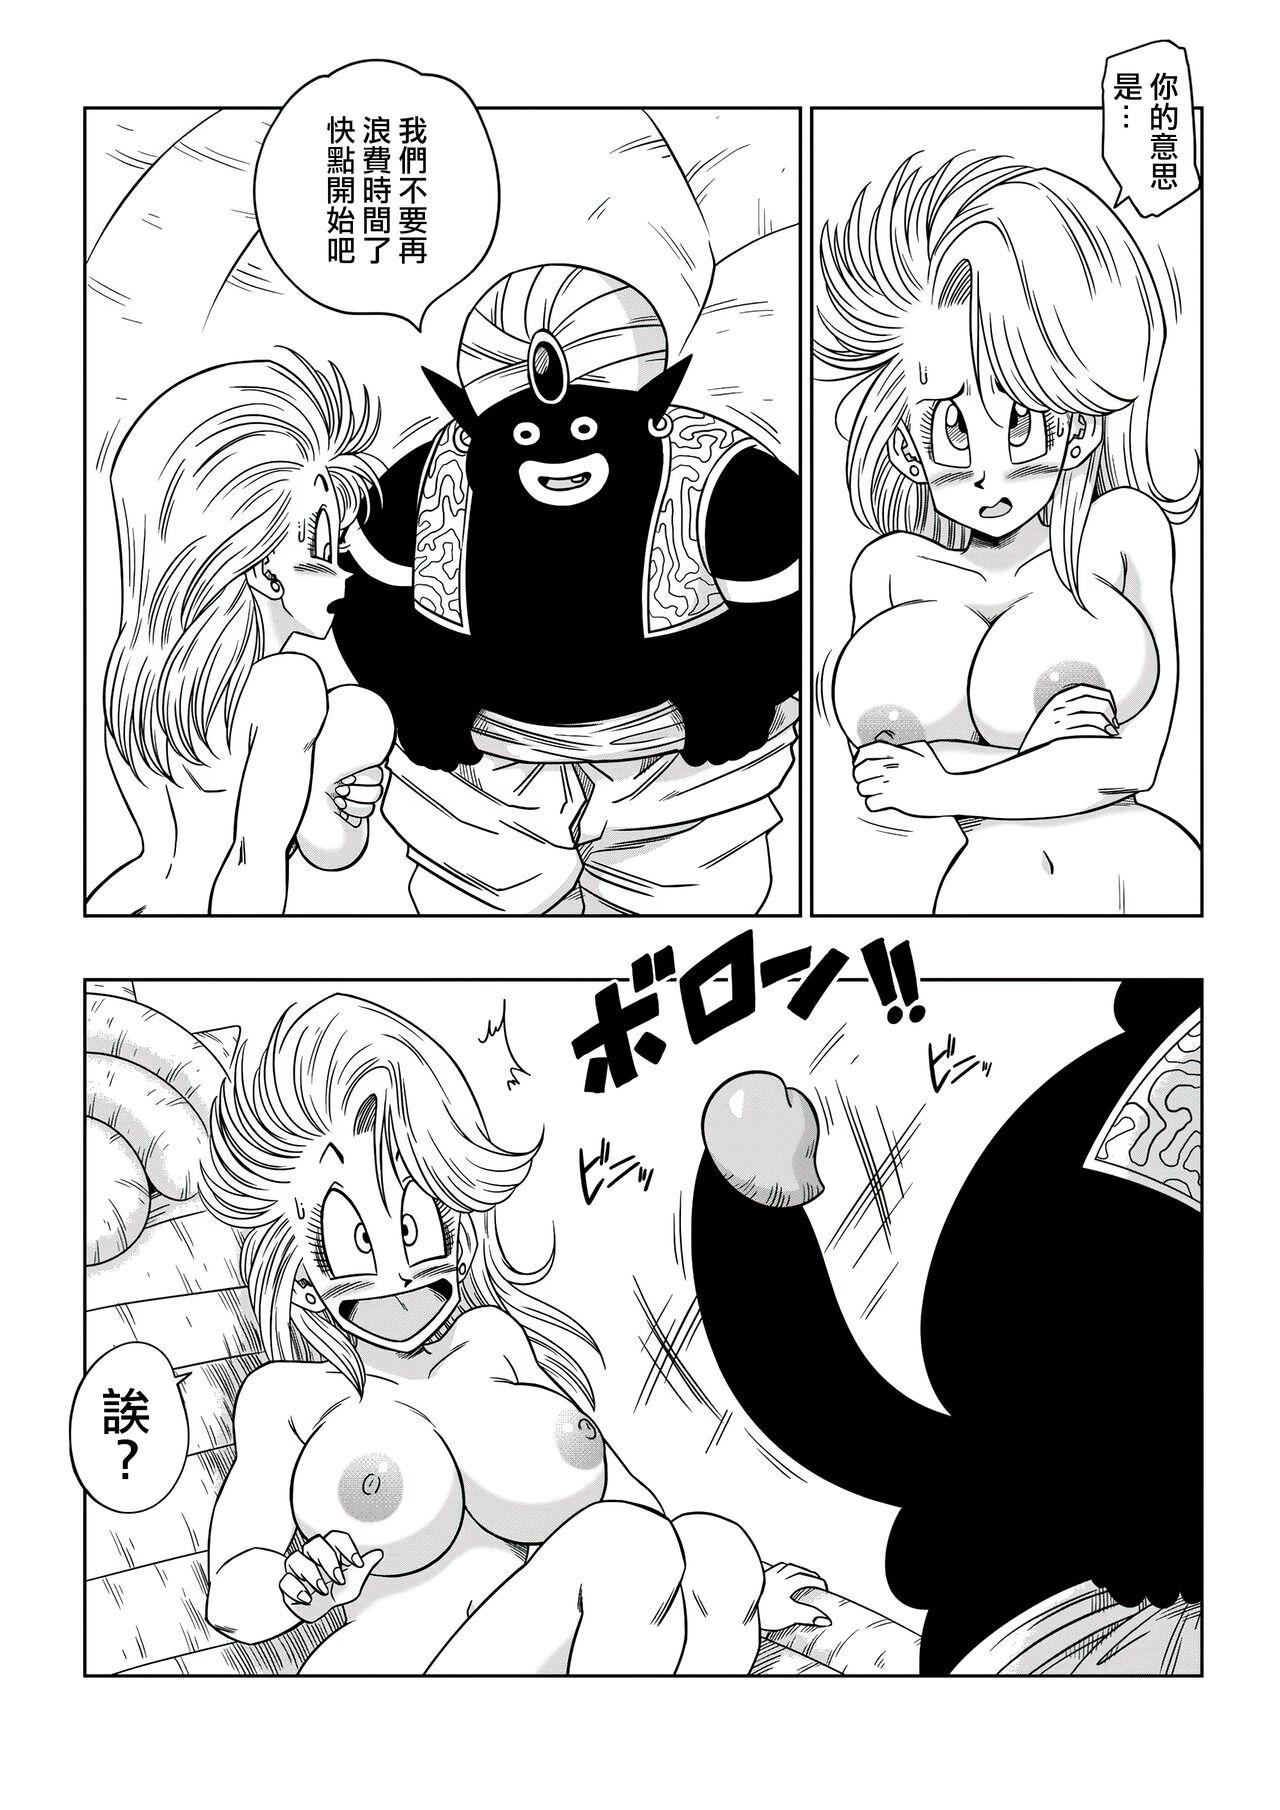 18 Porn Bulma Meets Mr.Popo - Sex inside the Mysterious Spaceship! - Dragon ball z Bigcock - Page 8